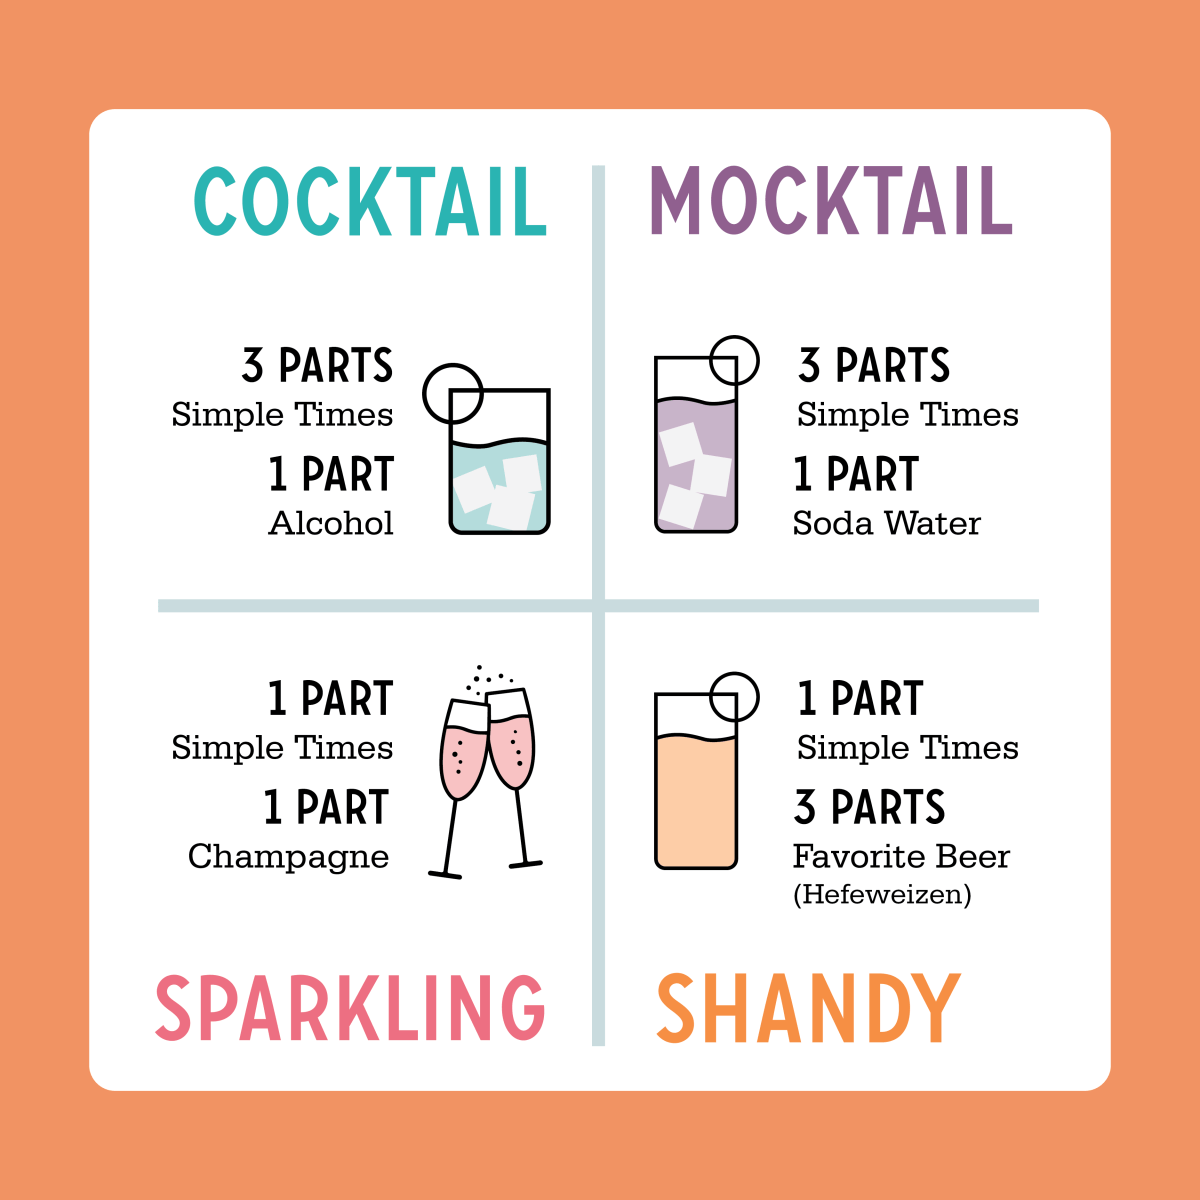 5 Cocktail Mixers That Will Simplify Your Life - Boozist